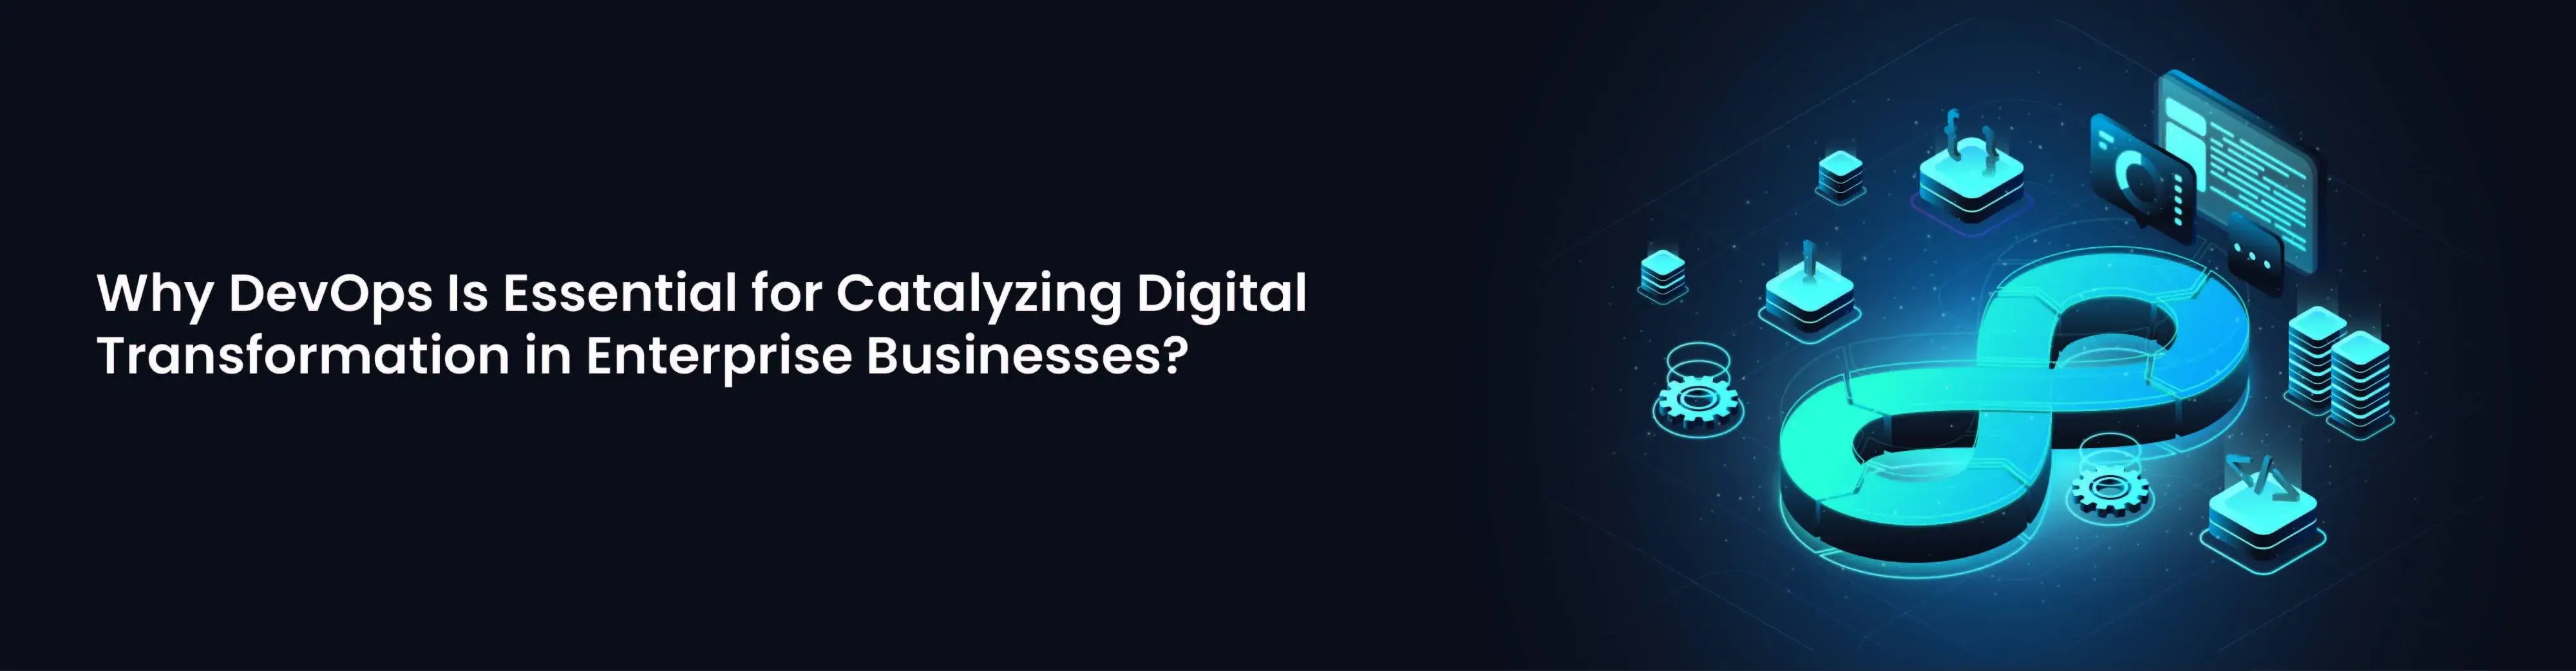 Why DevOps Is Essential for Catalyzing Digital Transformation in Enterprise Businesses?